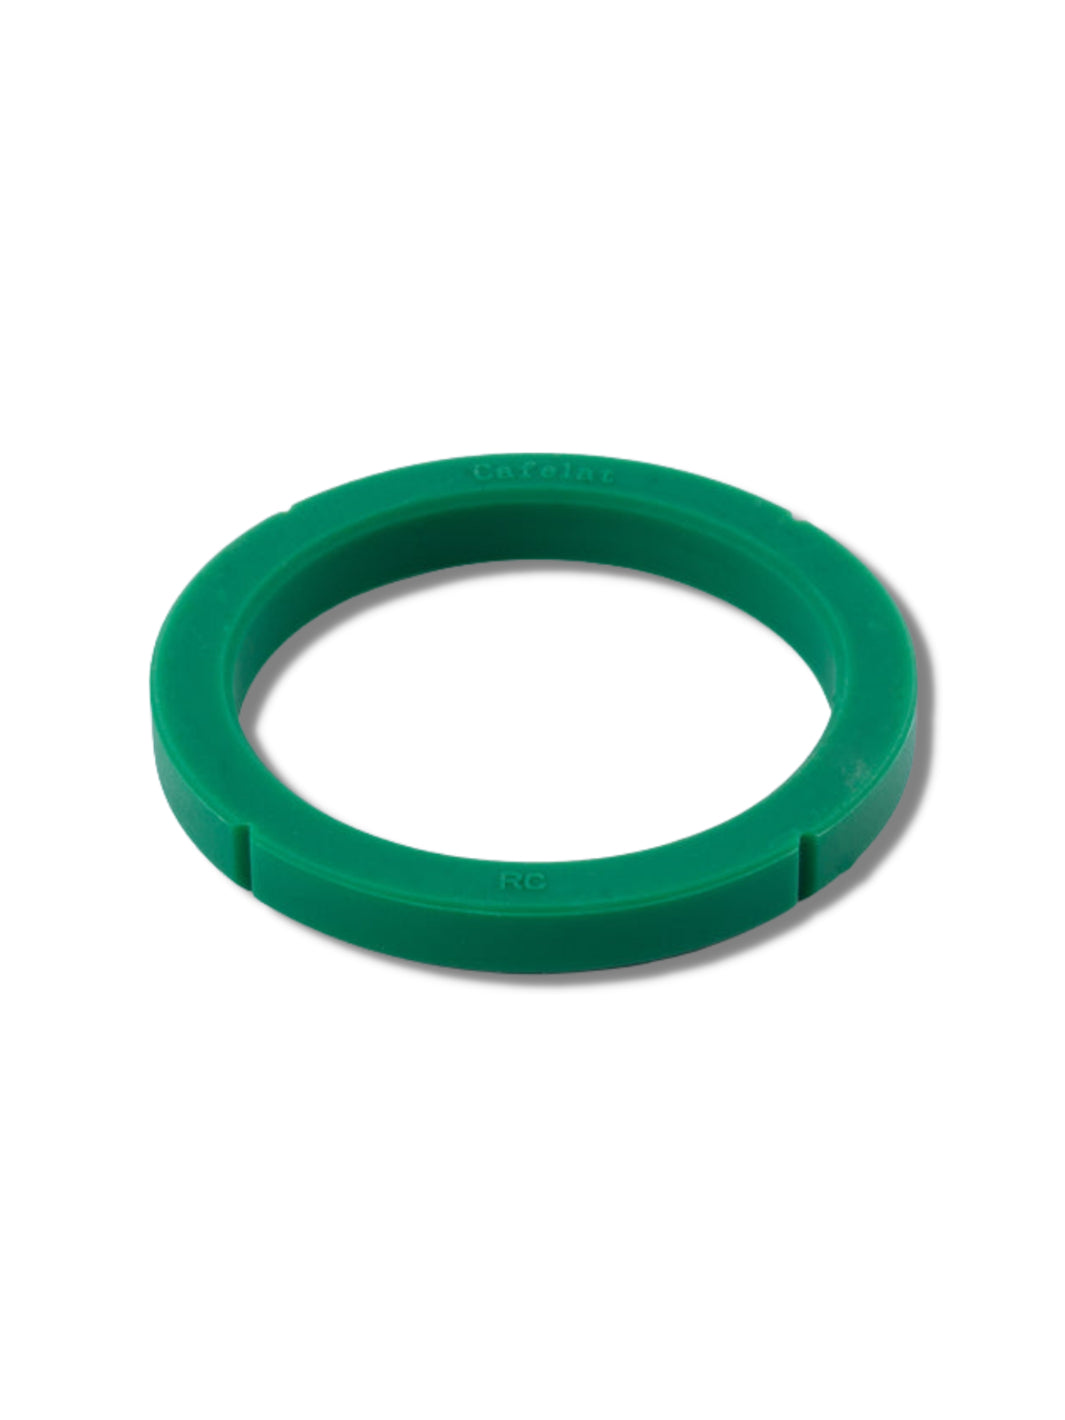 CAFELAT Silicone Group Gasket for Rancilio